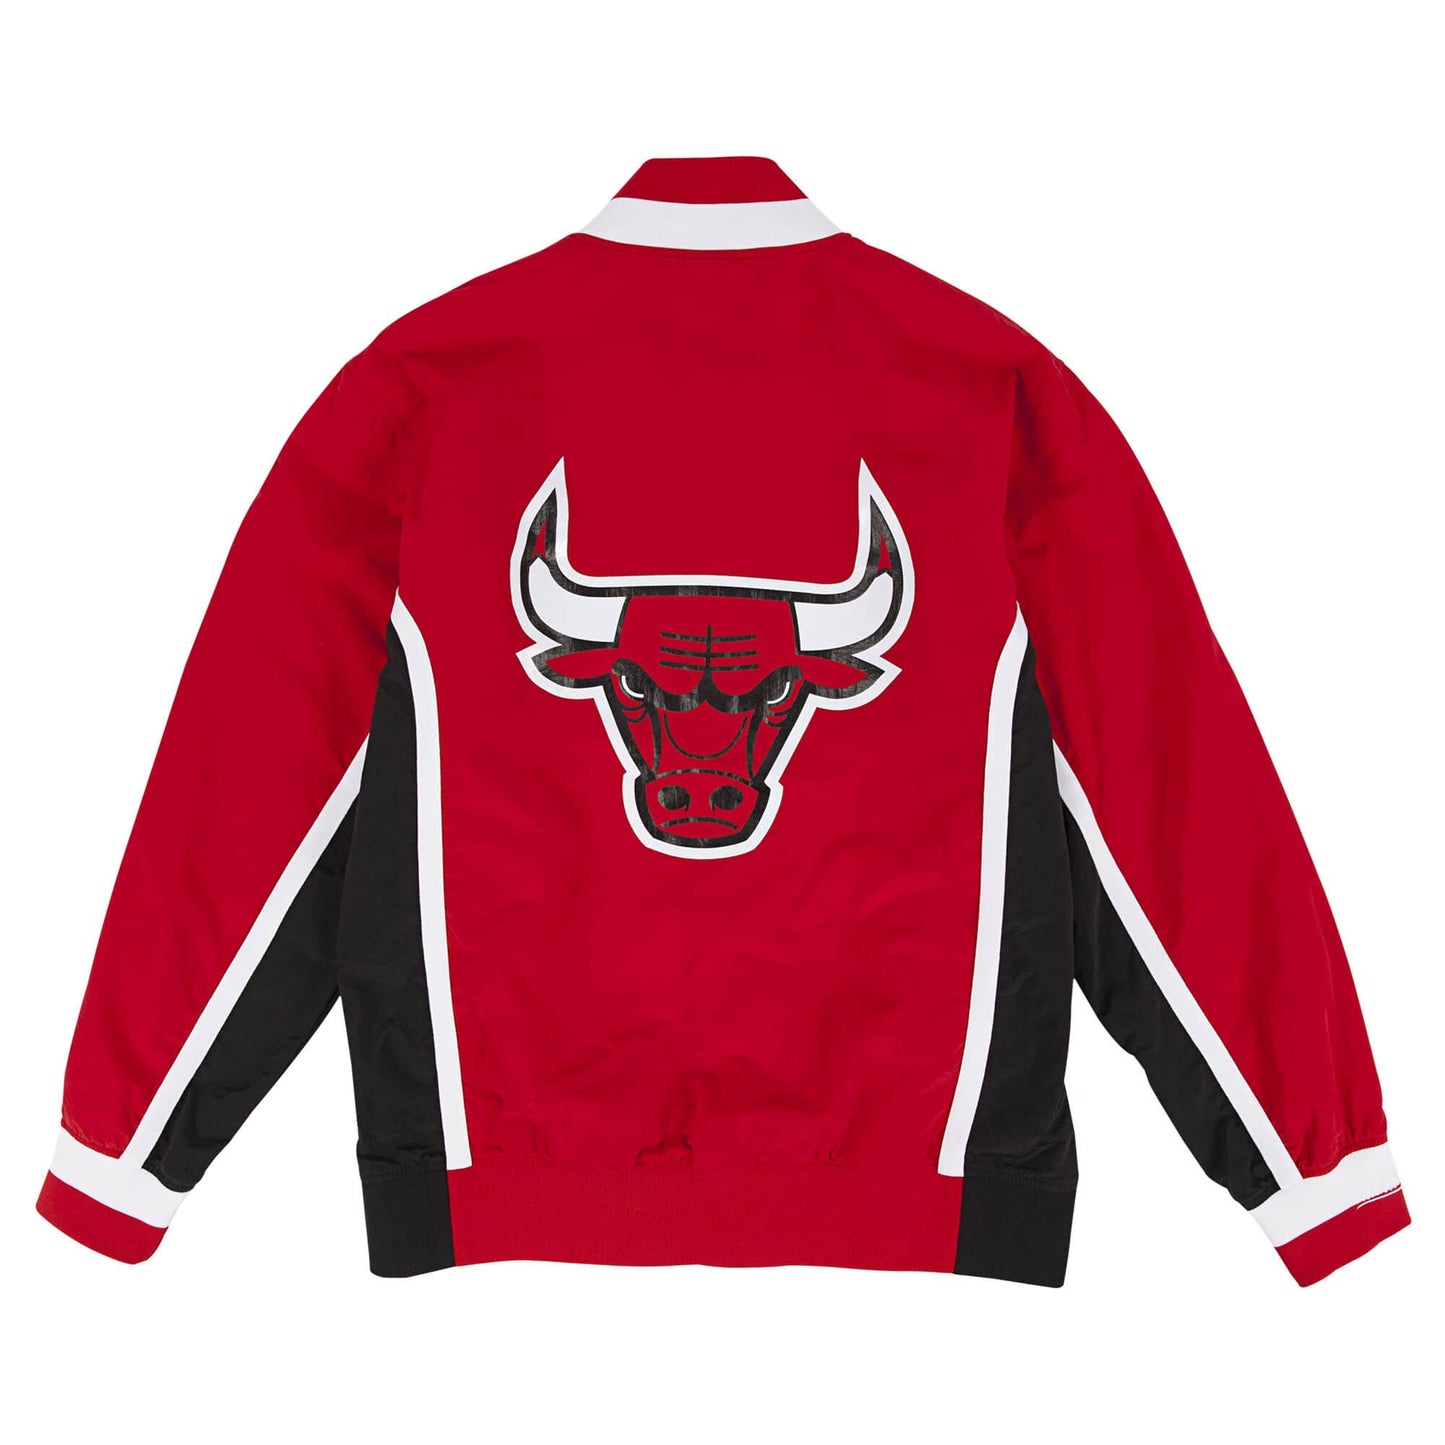 Mitchell & Ness 1992-93 Chicago Bulls Authentic Warm Up Jacket